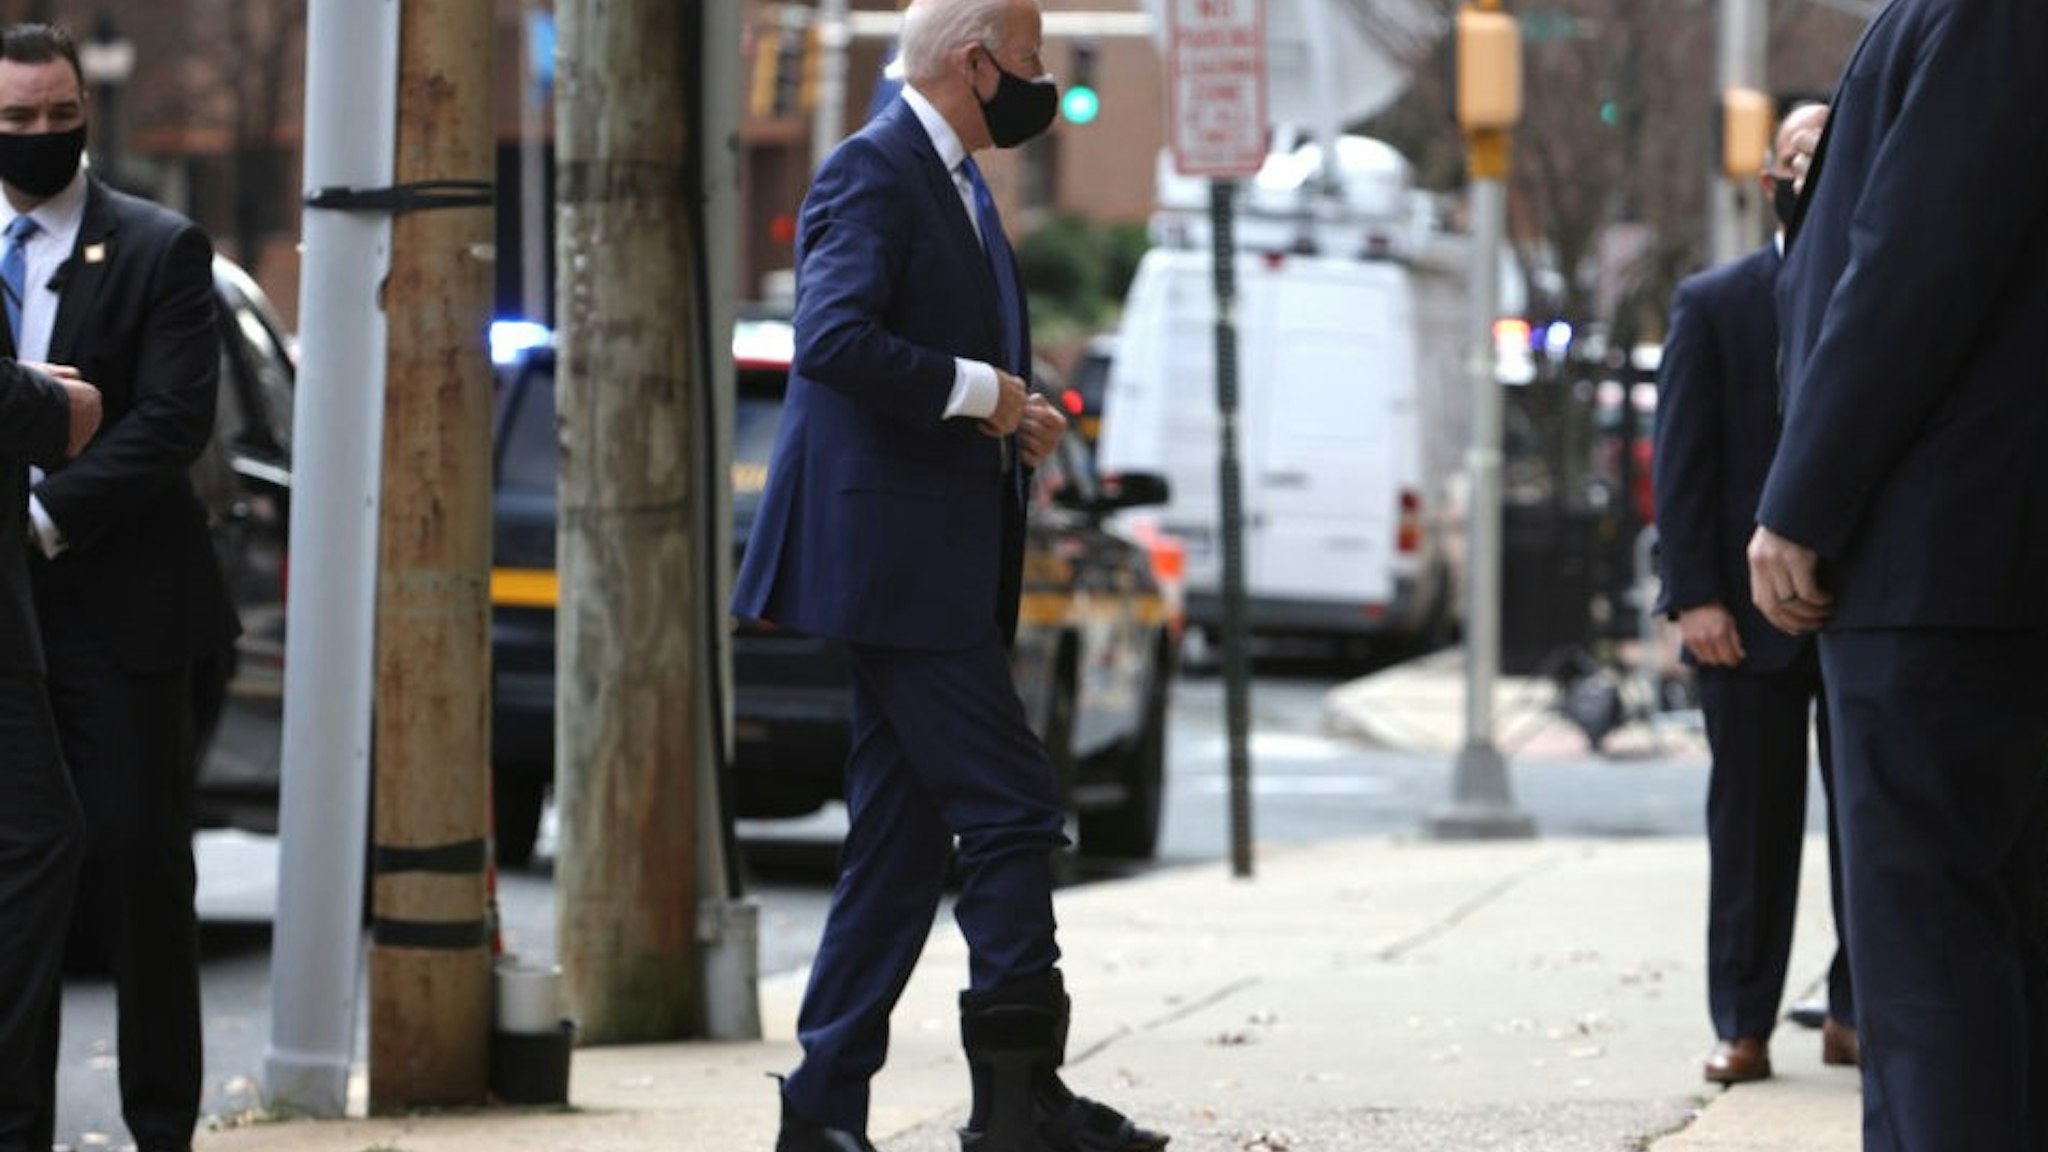 WILMINGTON, DELAWARE - DECEMBER 01: U.S. President-elect Joe Biden, wearing a walking boot due to hairline fractures after he strained his ankle playing with his dog Major, arrives at the Queen Theater to name his economic team on December 1, 2020 in Wilmington, Delaware. Biden is nominating and appointing key positions of the team, including Janet Yellen to be Secretary of the Treasury. (Photo by